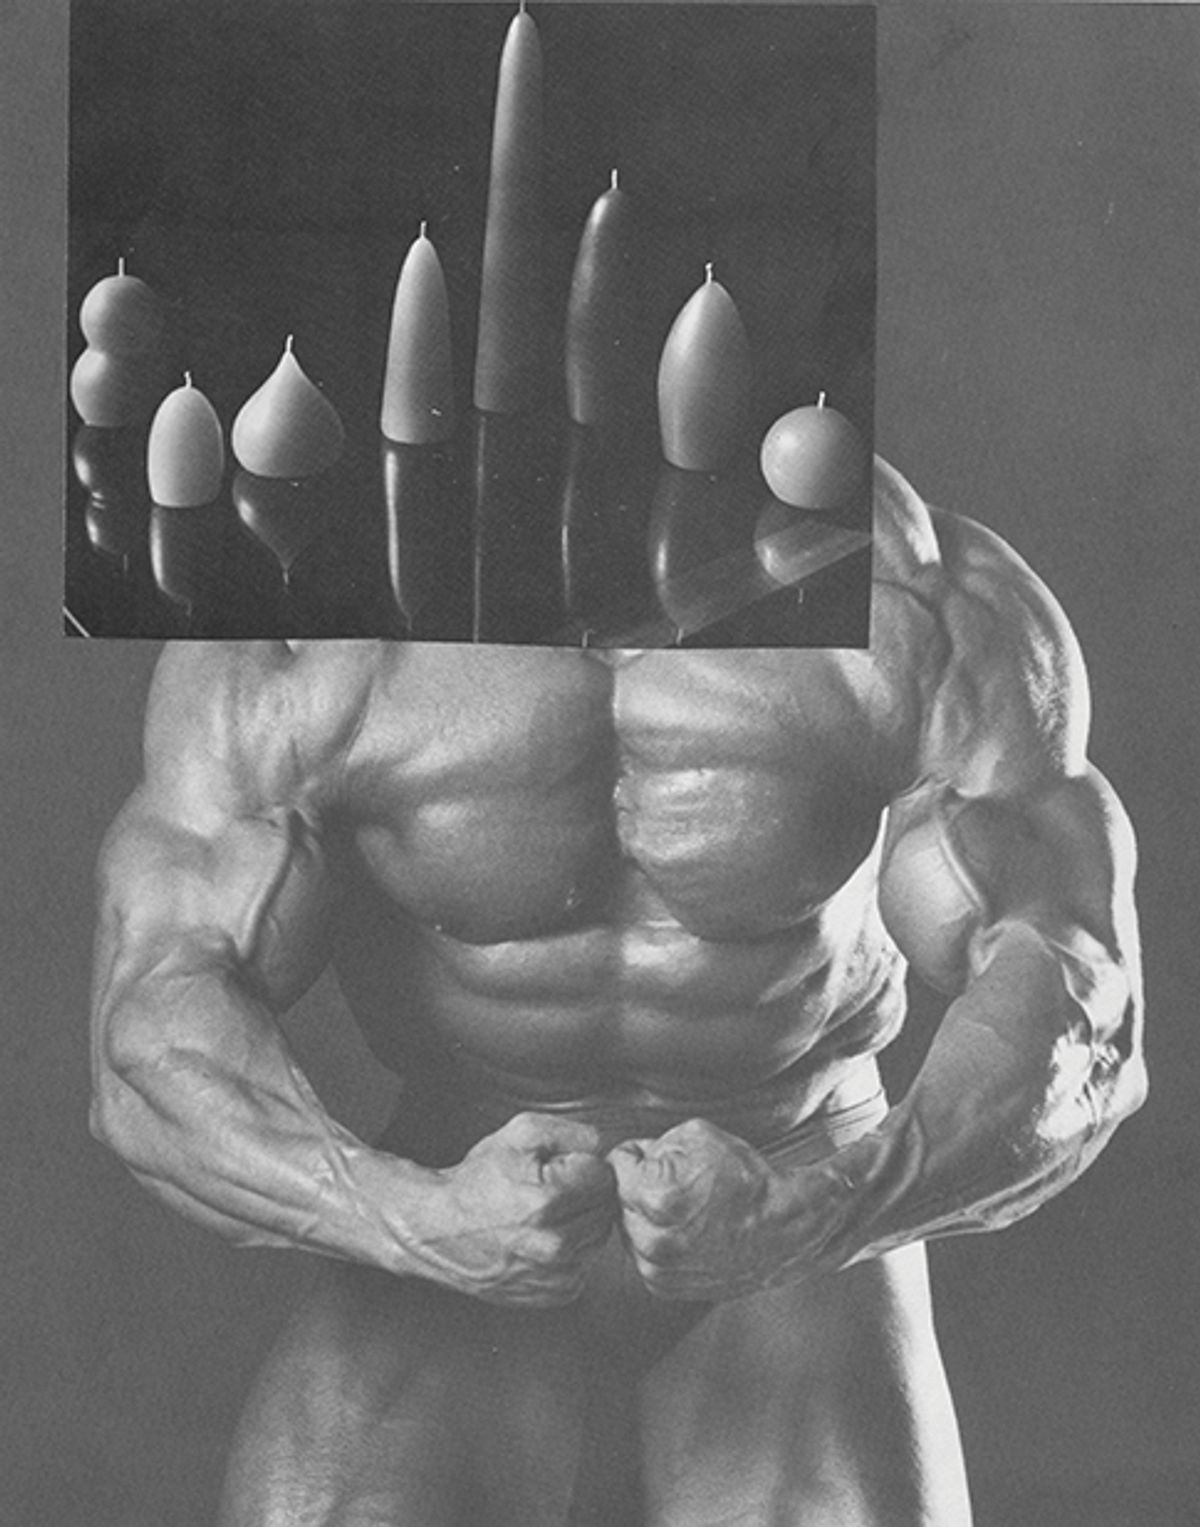 Ruby’s Physicalism/The Recombine 2 (2006) is from a six-part series of  collages of photographs of posing bodybuilders juxtaposed with candles Courtesy of Sterling Ruby Studio